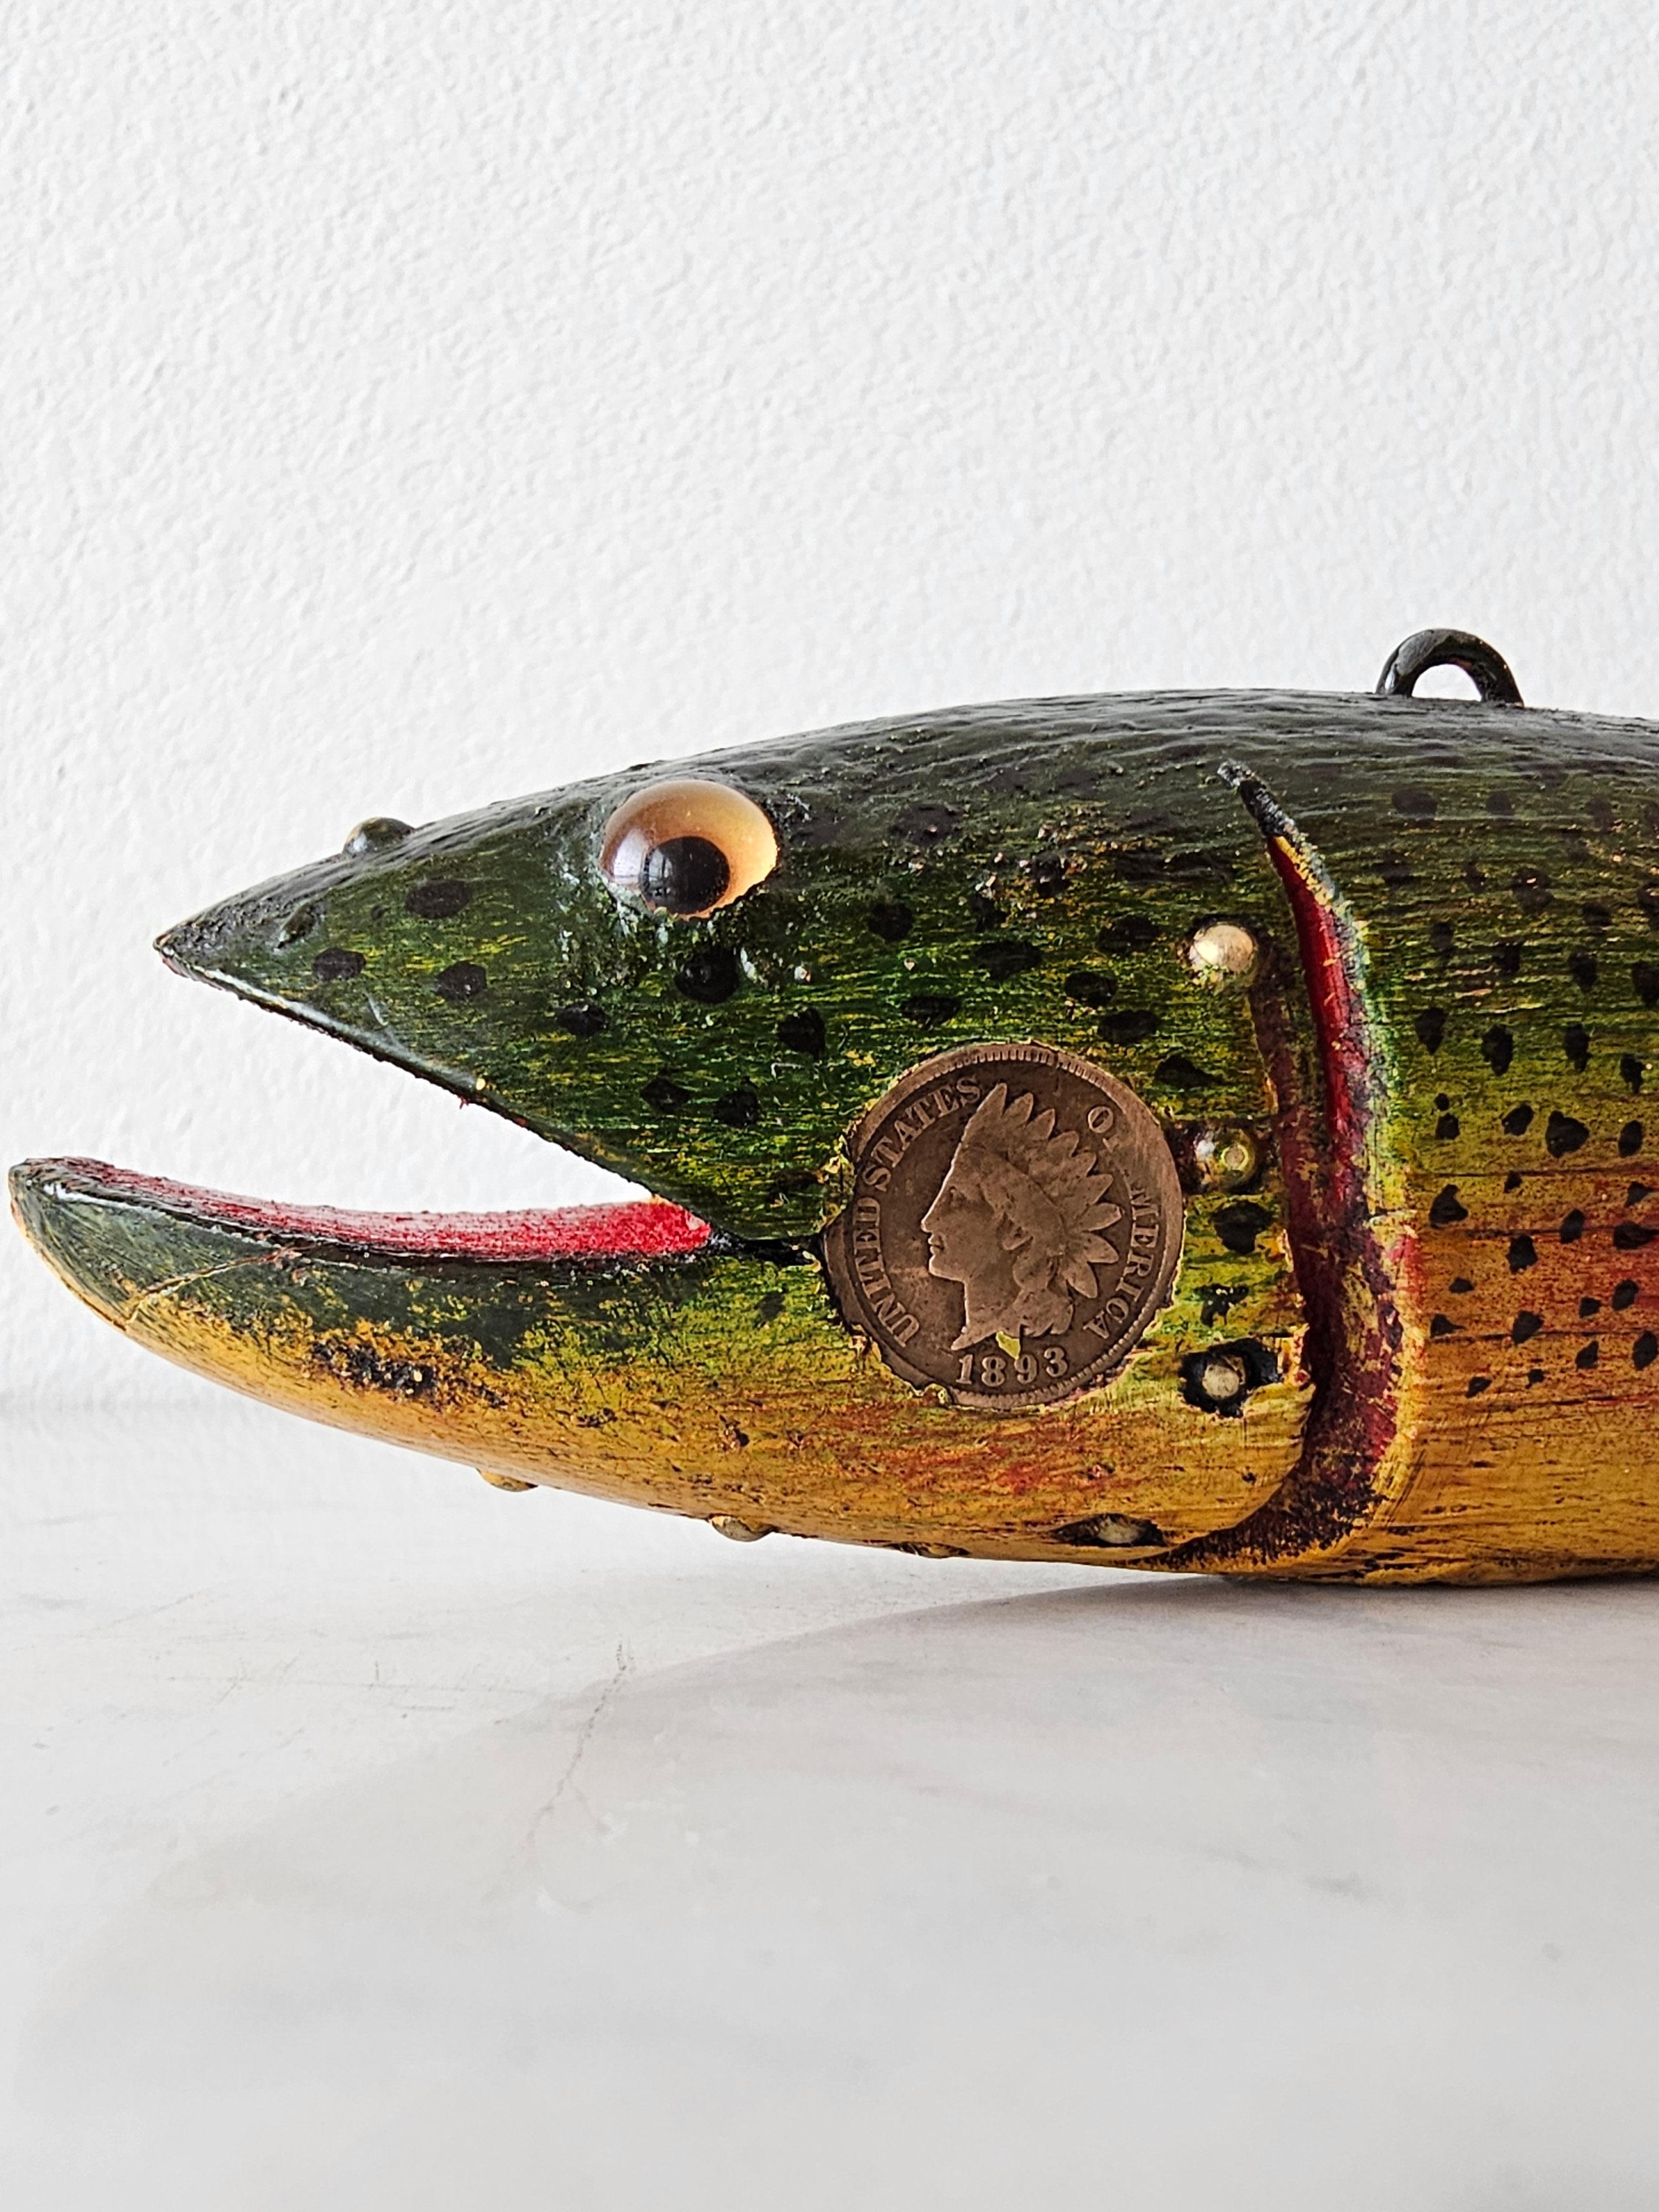 Vintage American Folk Art Duluth Fish Decoy Dfd Signed Carved Painted Trout 5